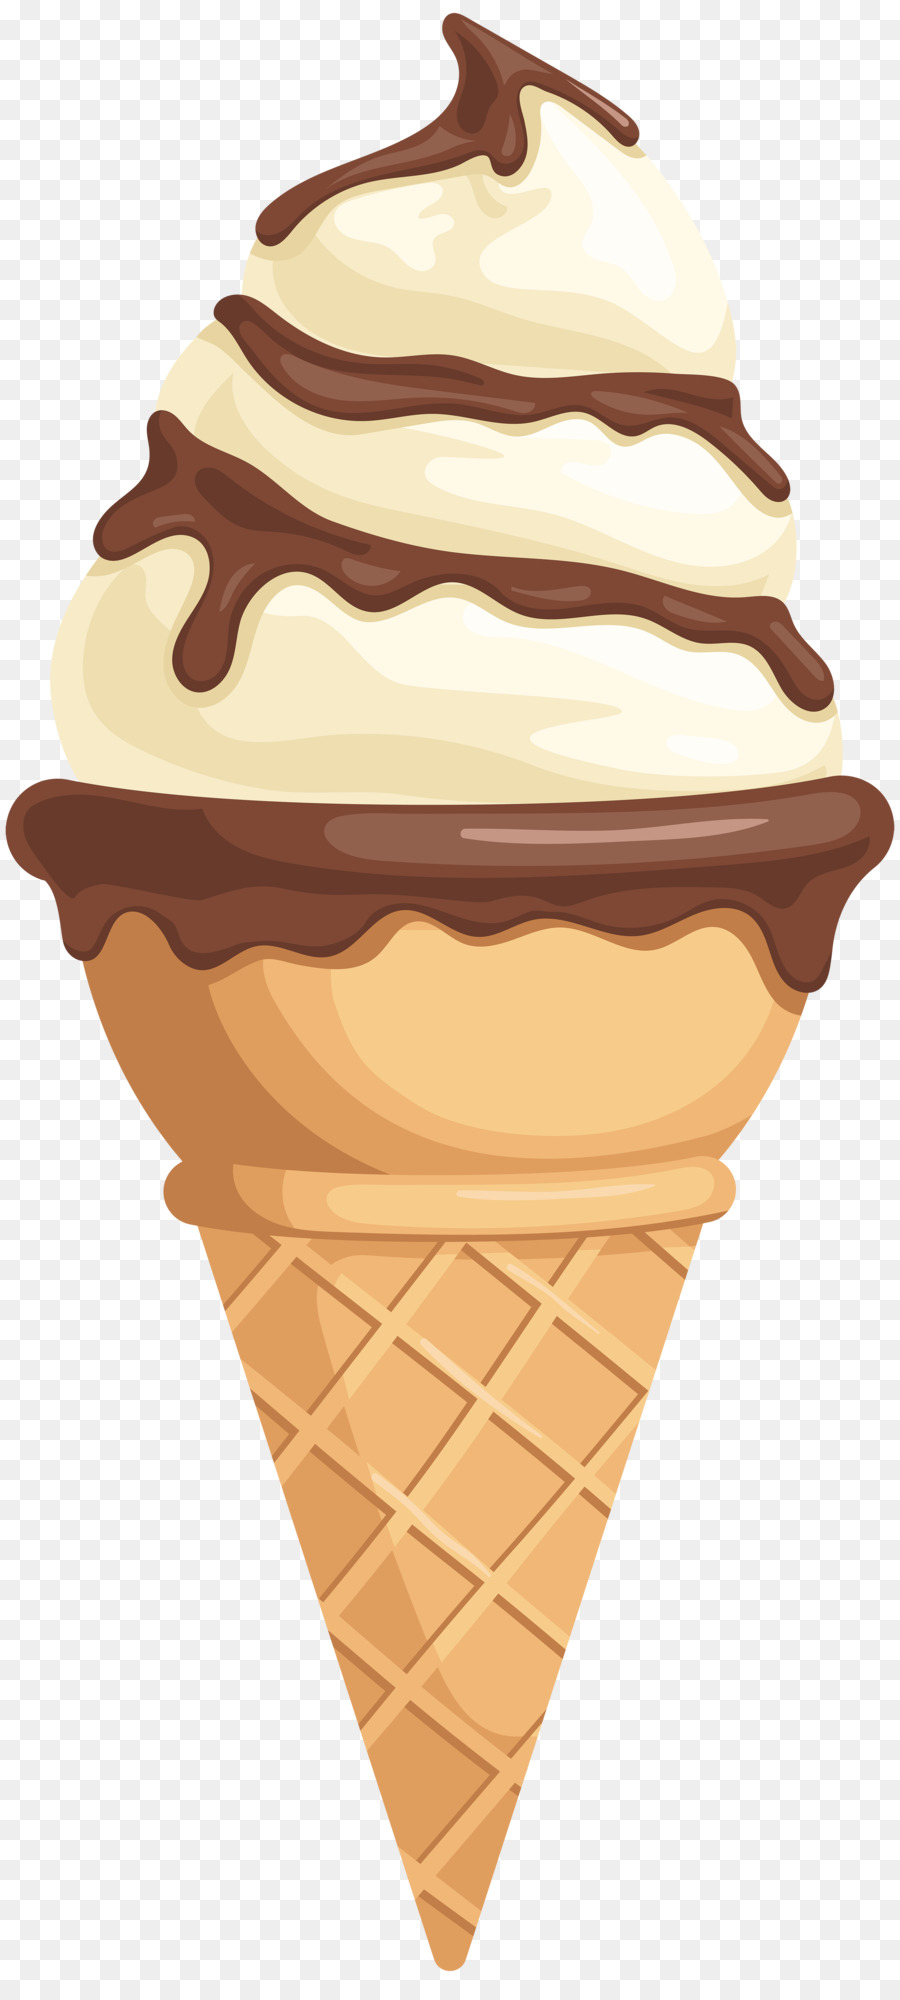 Ice Cream Cones Chocolate ice cream Snow cone - whisk png download - 2722*6000 - Free Transparent Ice Cream png Download.